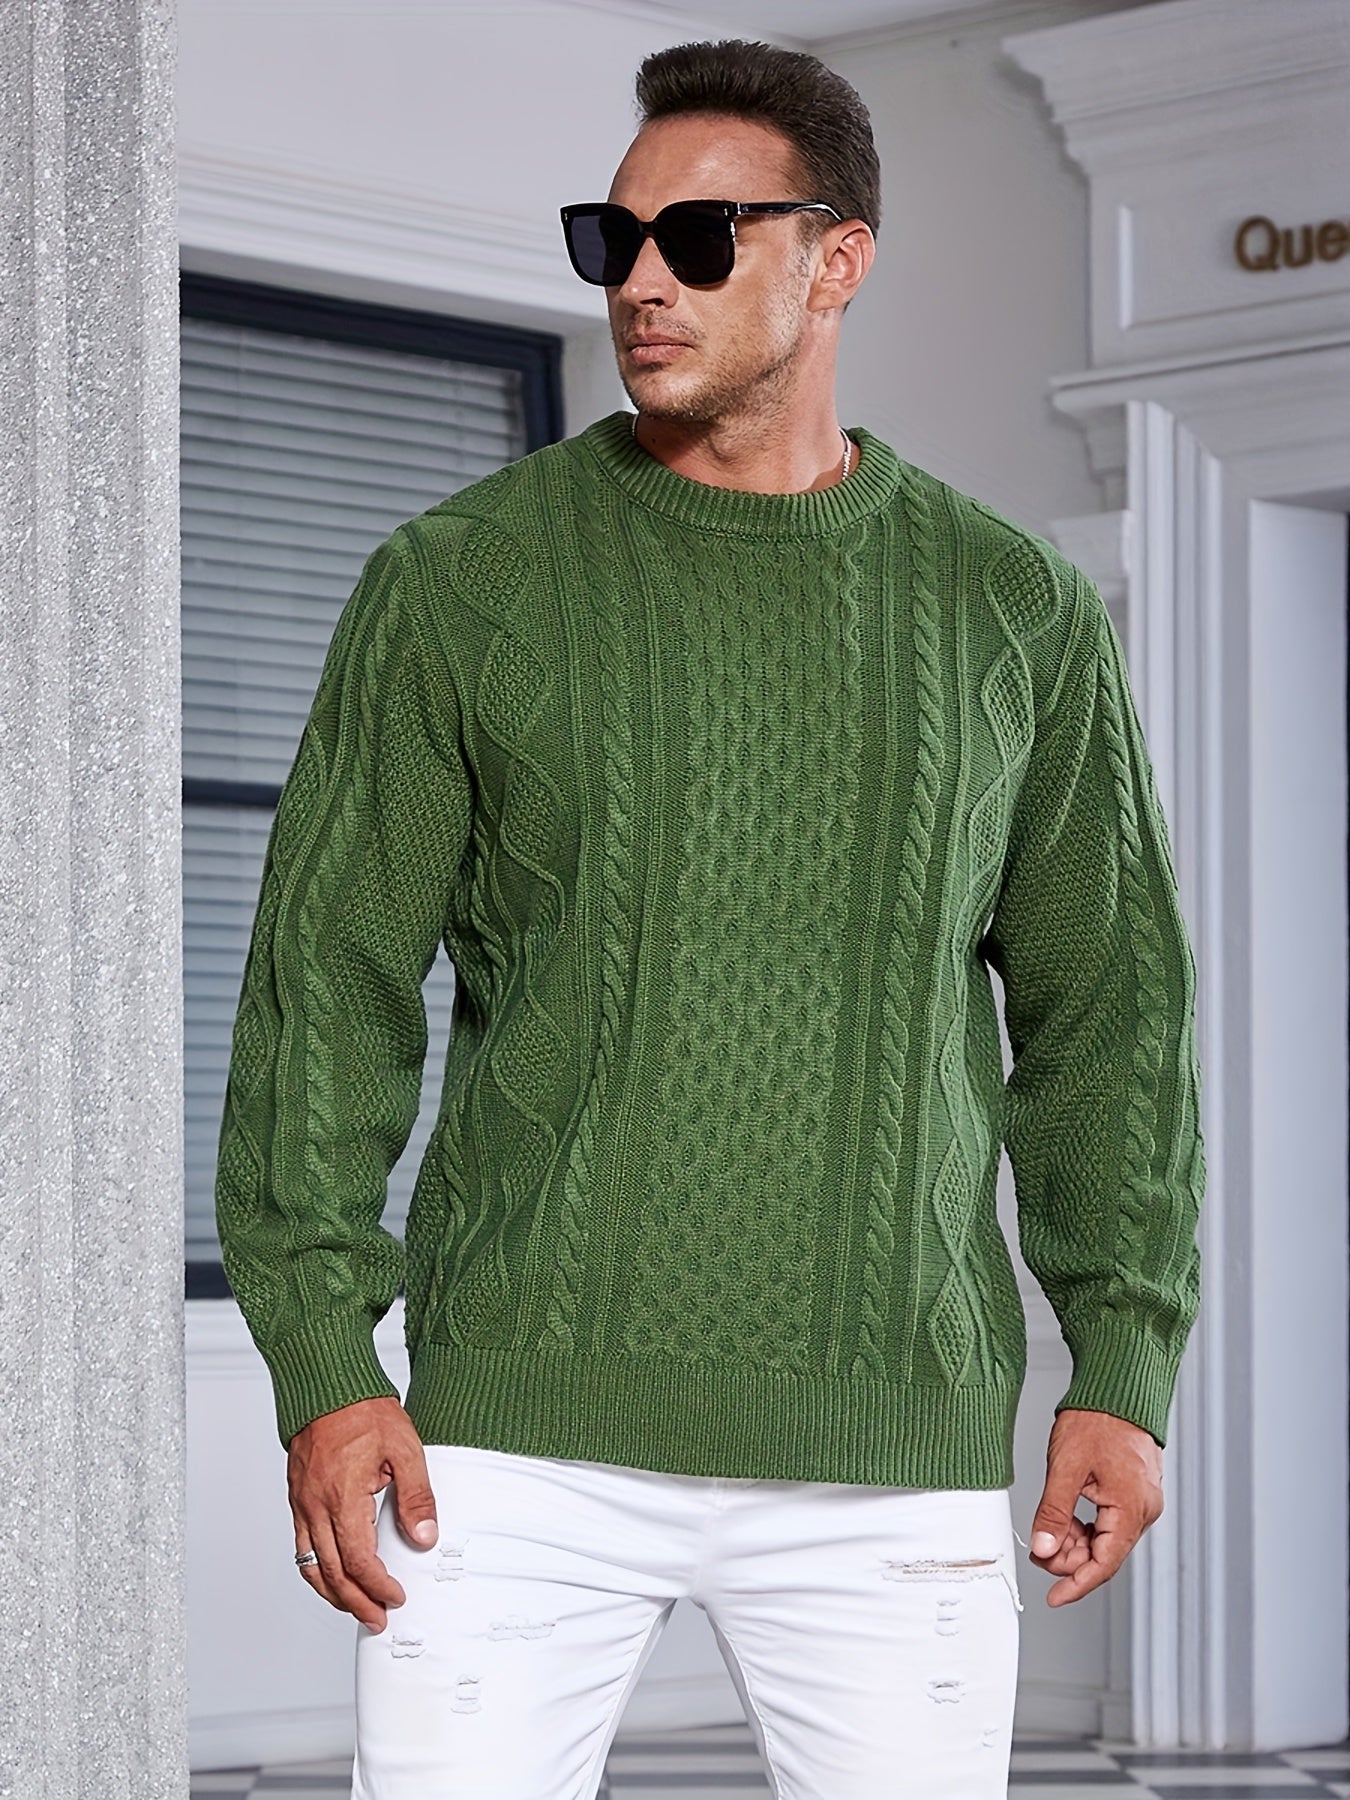 gbolsos  Men's Knit Argyle Sweater, Fashion Pullover Long-sleeved Sweater For Spring & Autumn, Plus Size